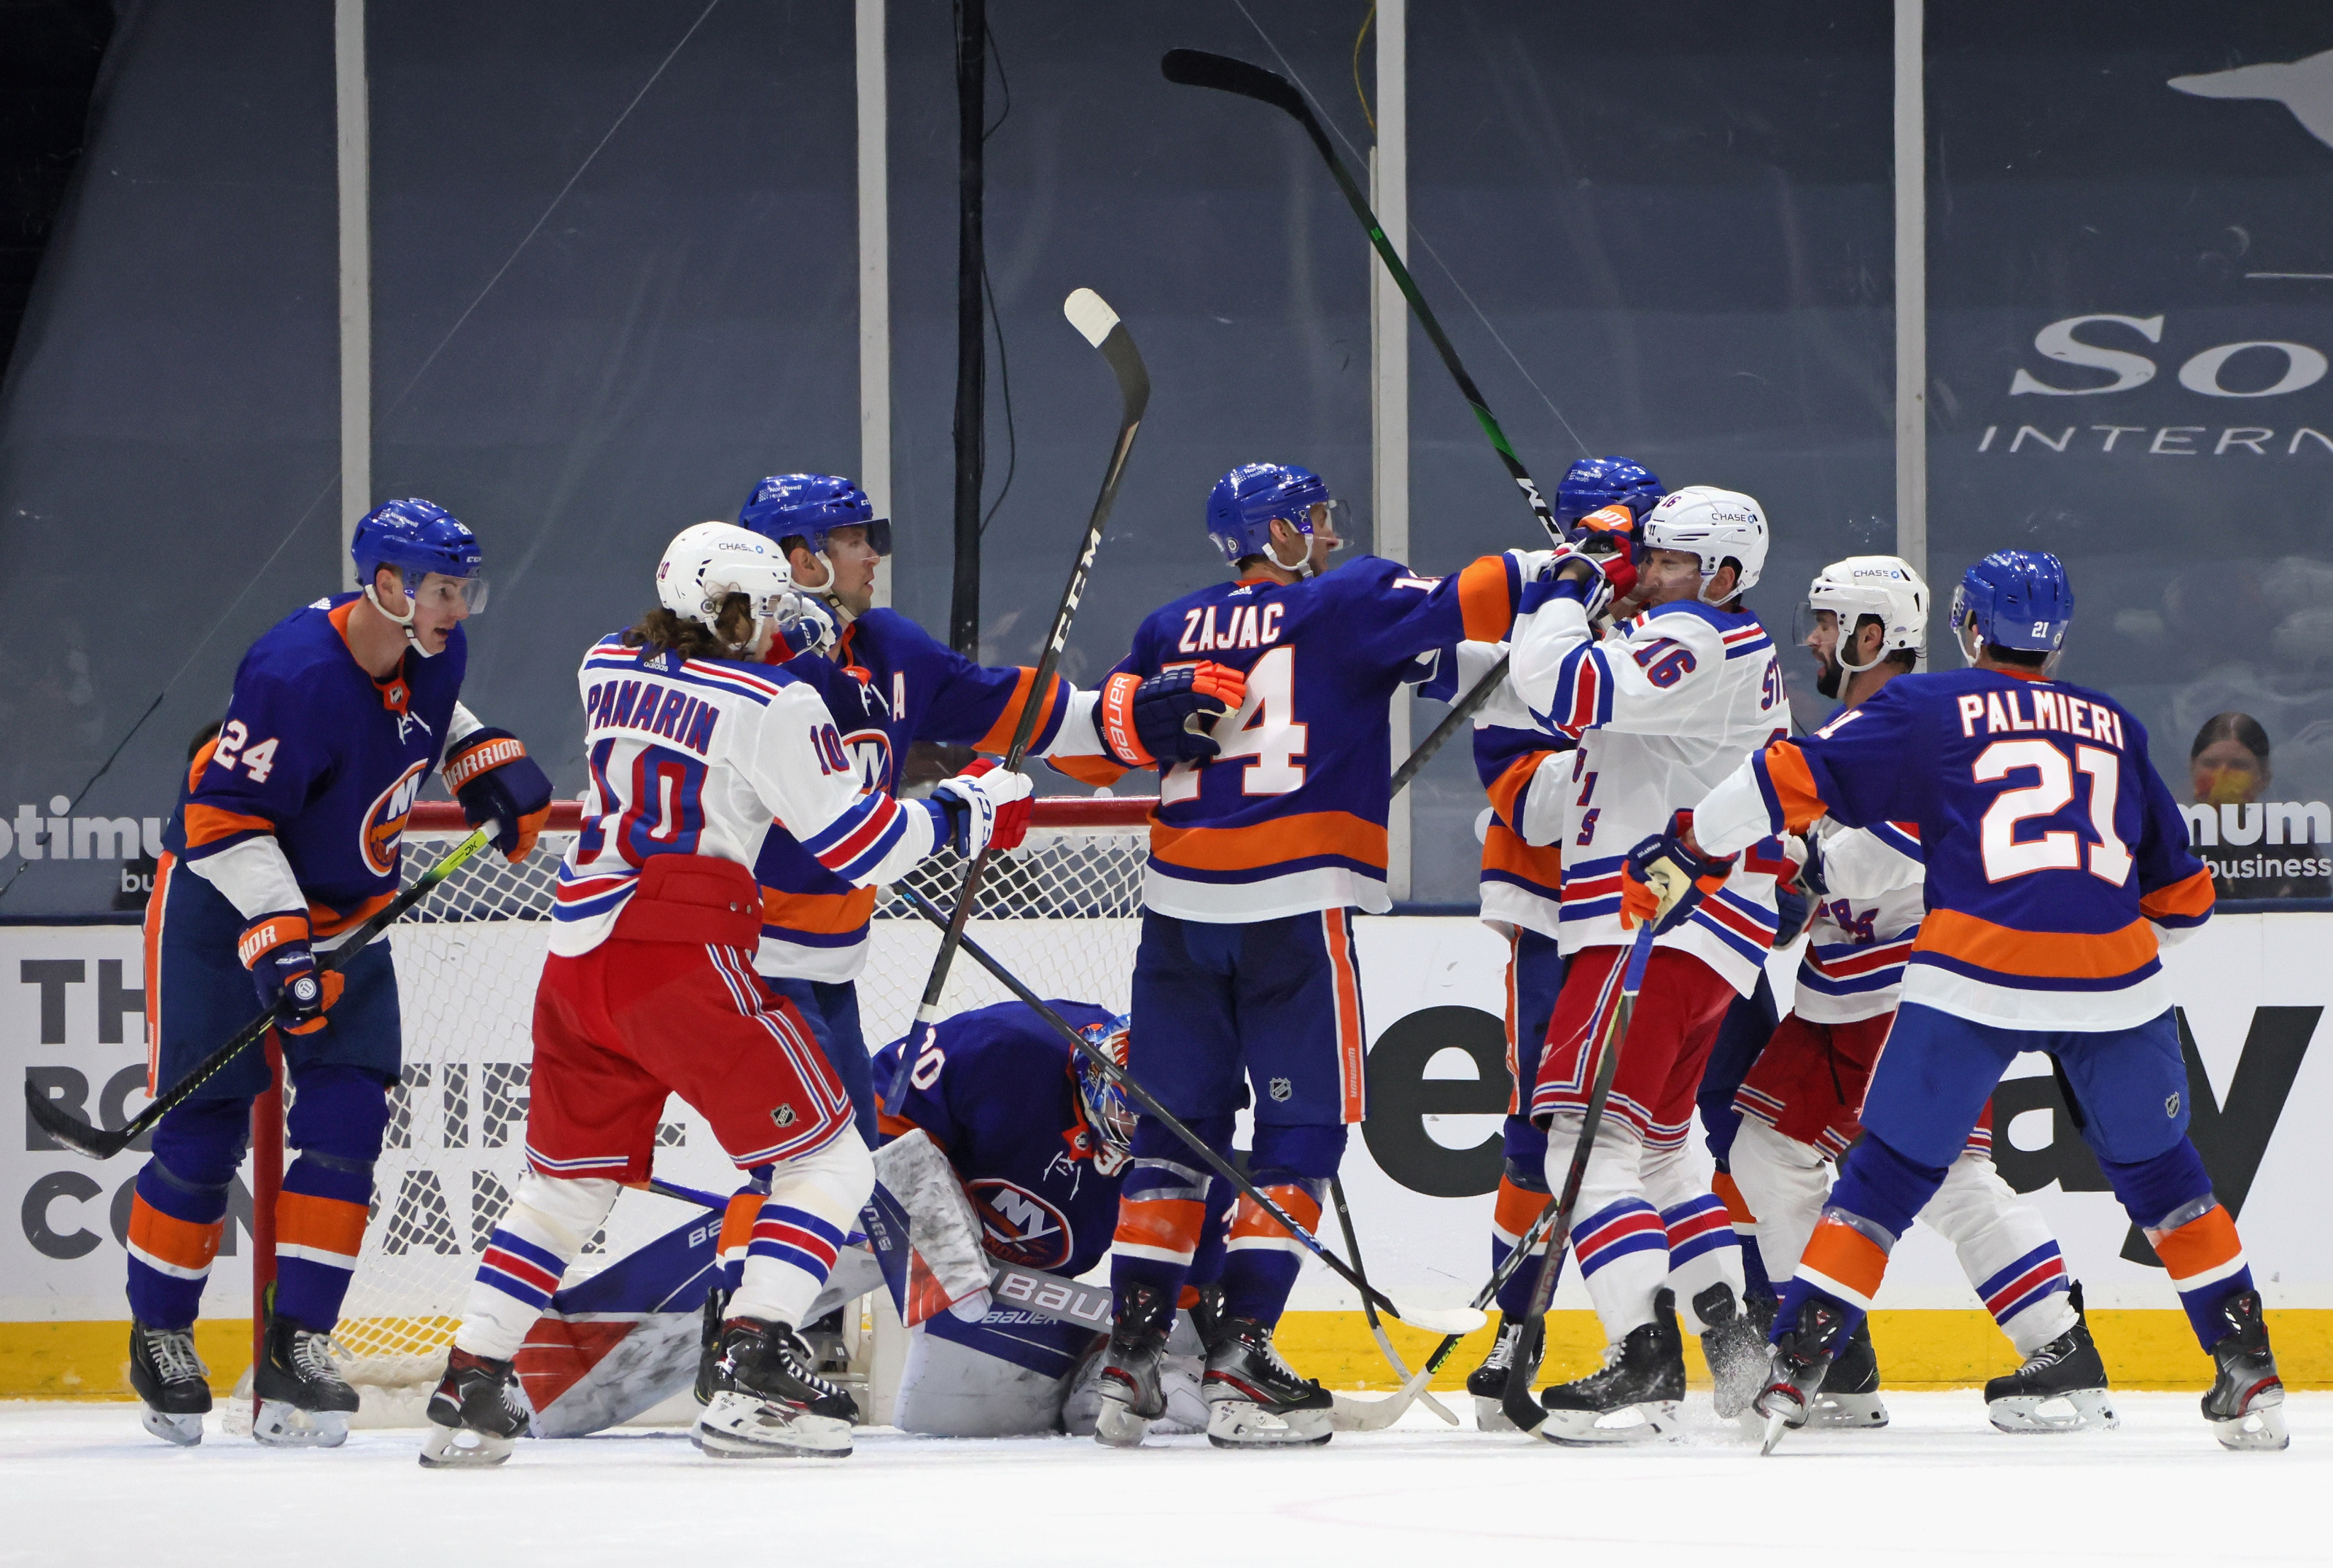 The New York Rangers The Playoffs start tonight against the Islanders